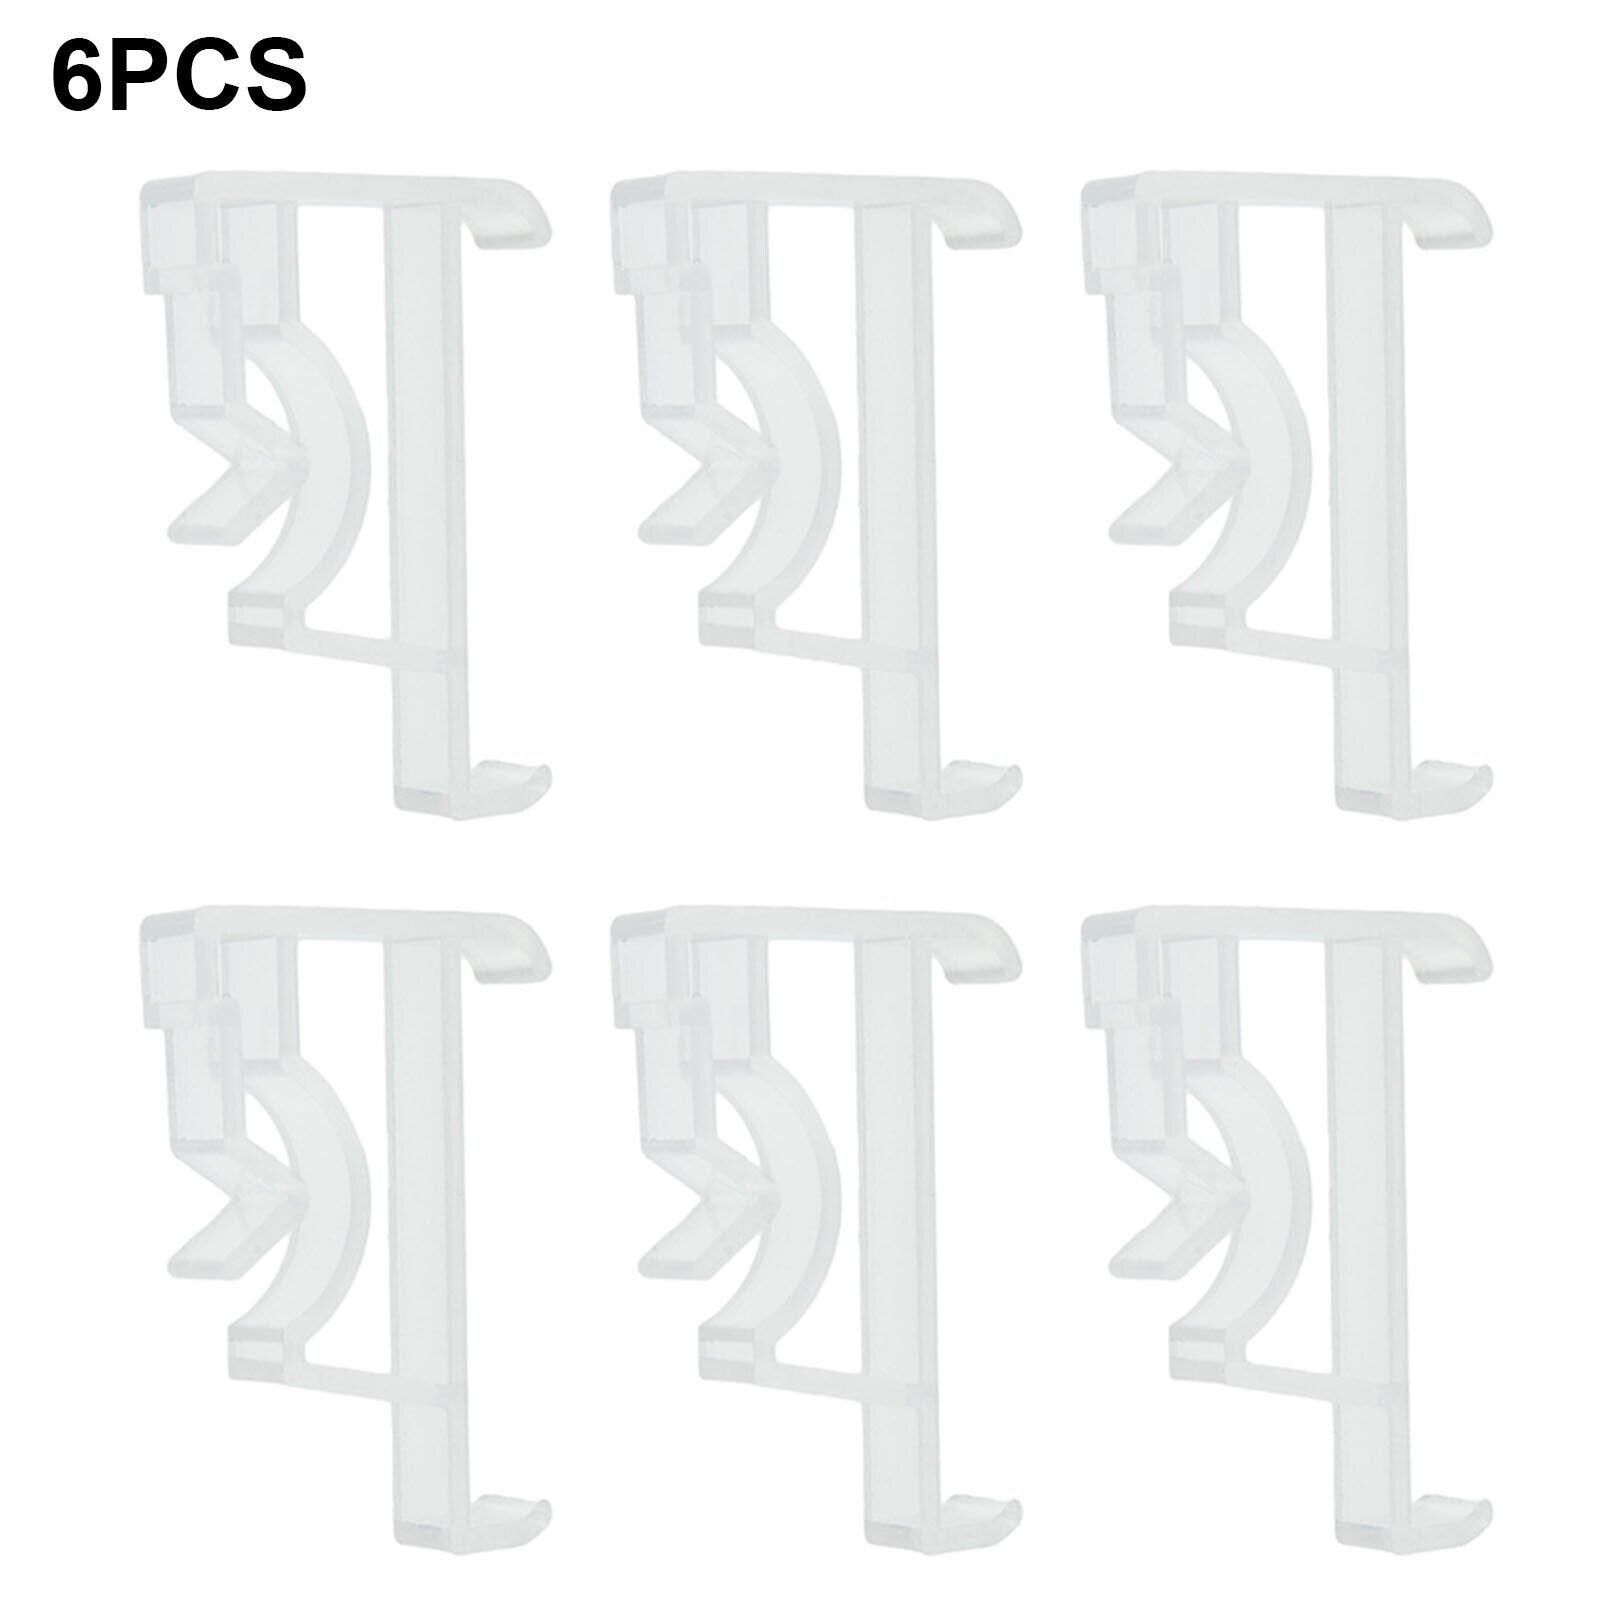 6 Pieces Valance Clips 2 Inch Clear Blind-Clips For Blind Valance